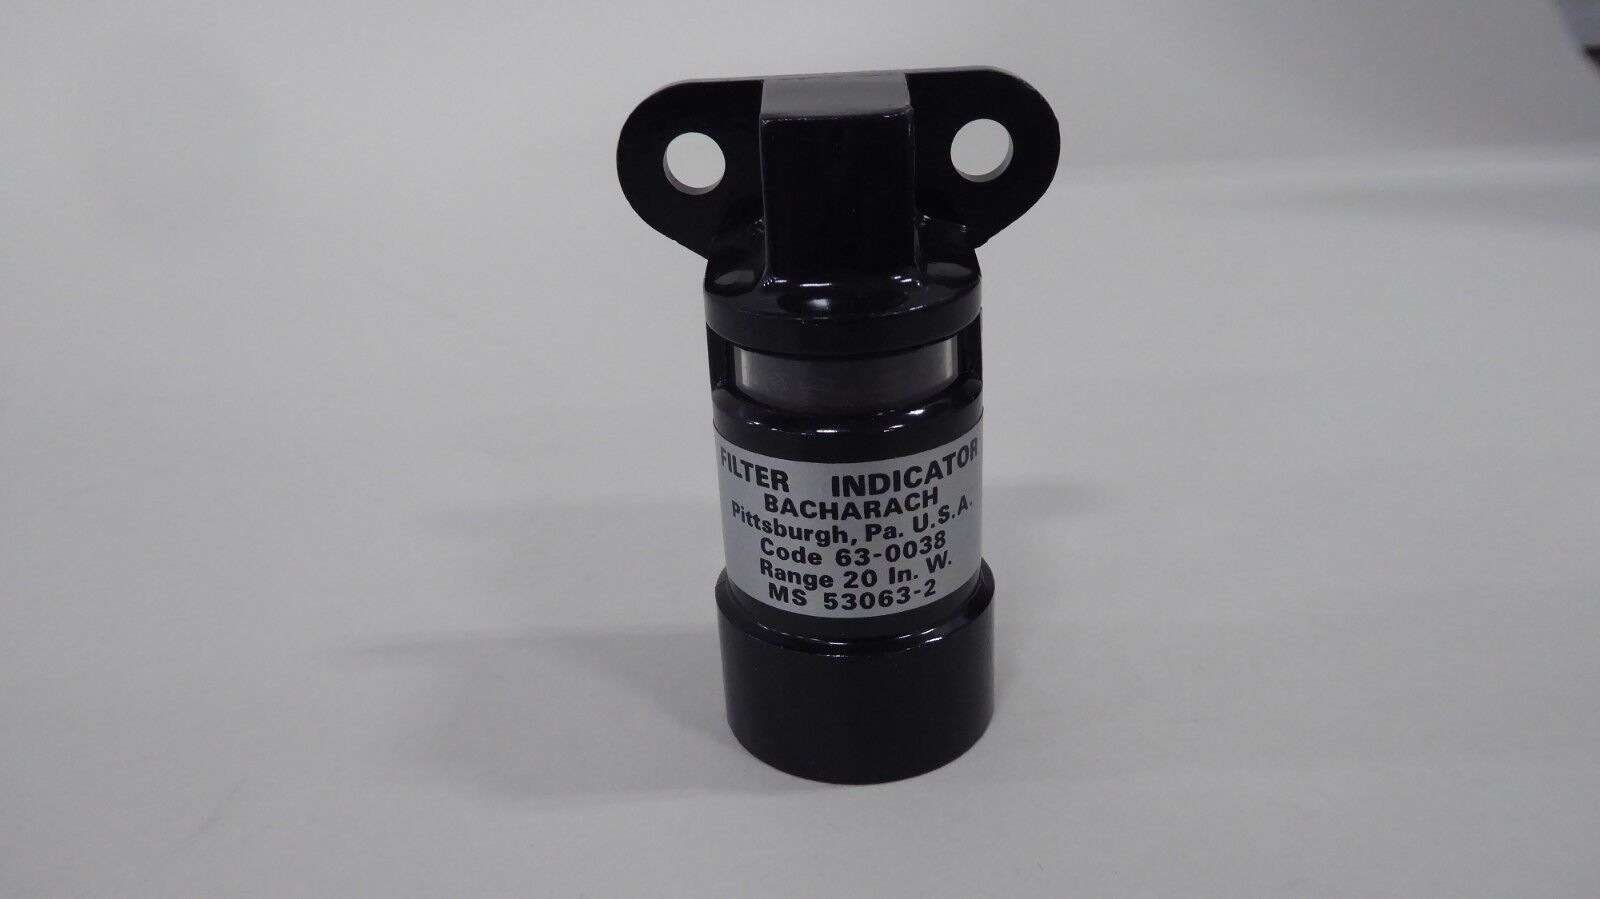 Bacharach MS53063-2 Filter Indicator Code 63-0038 Range 20 In W MS-53063-2